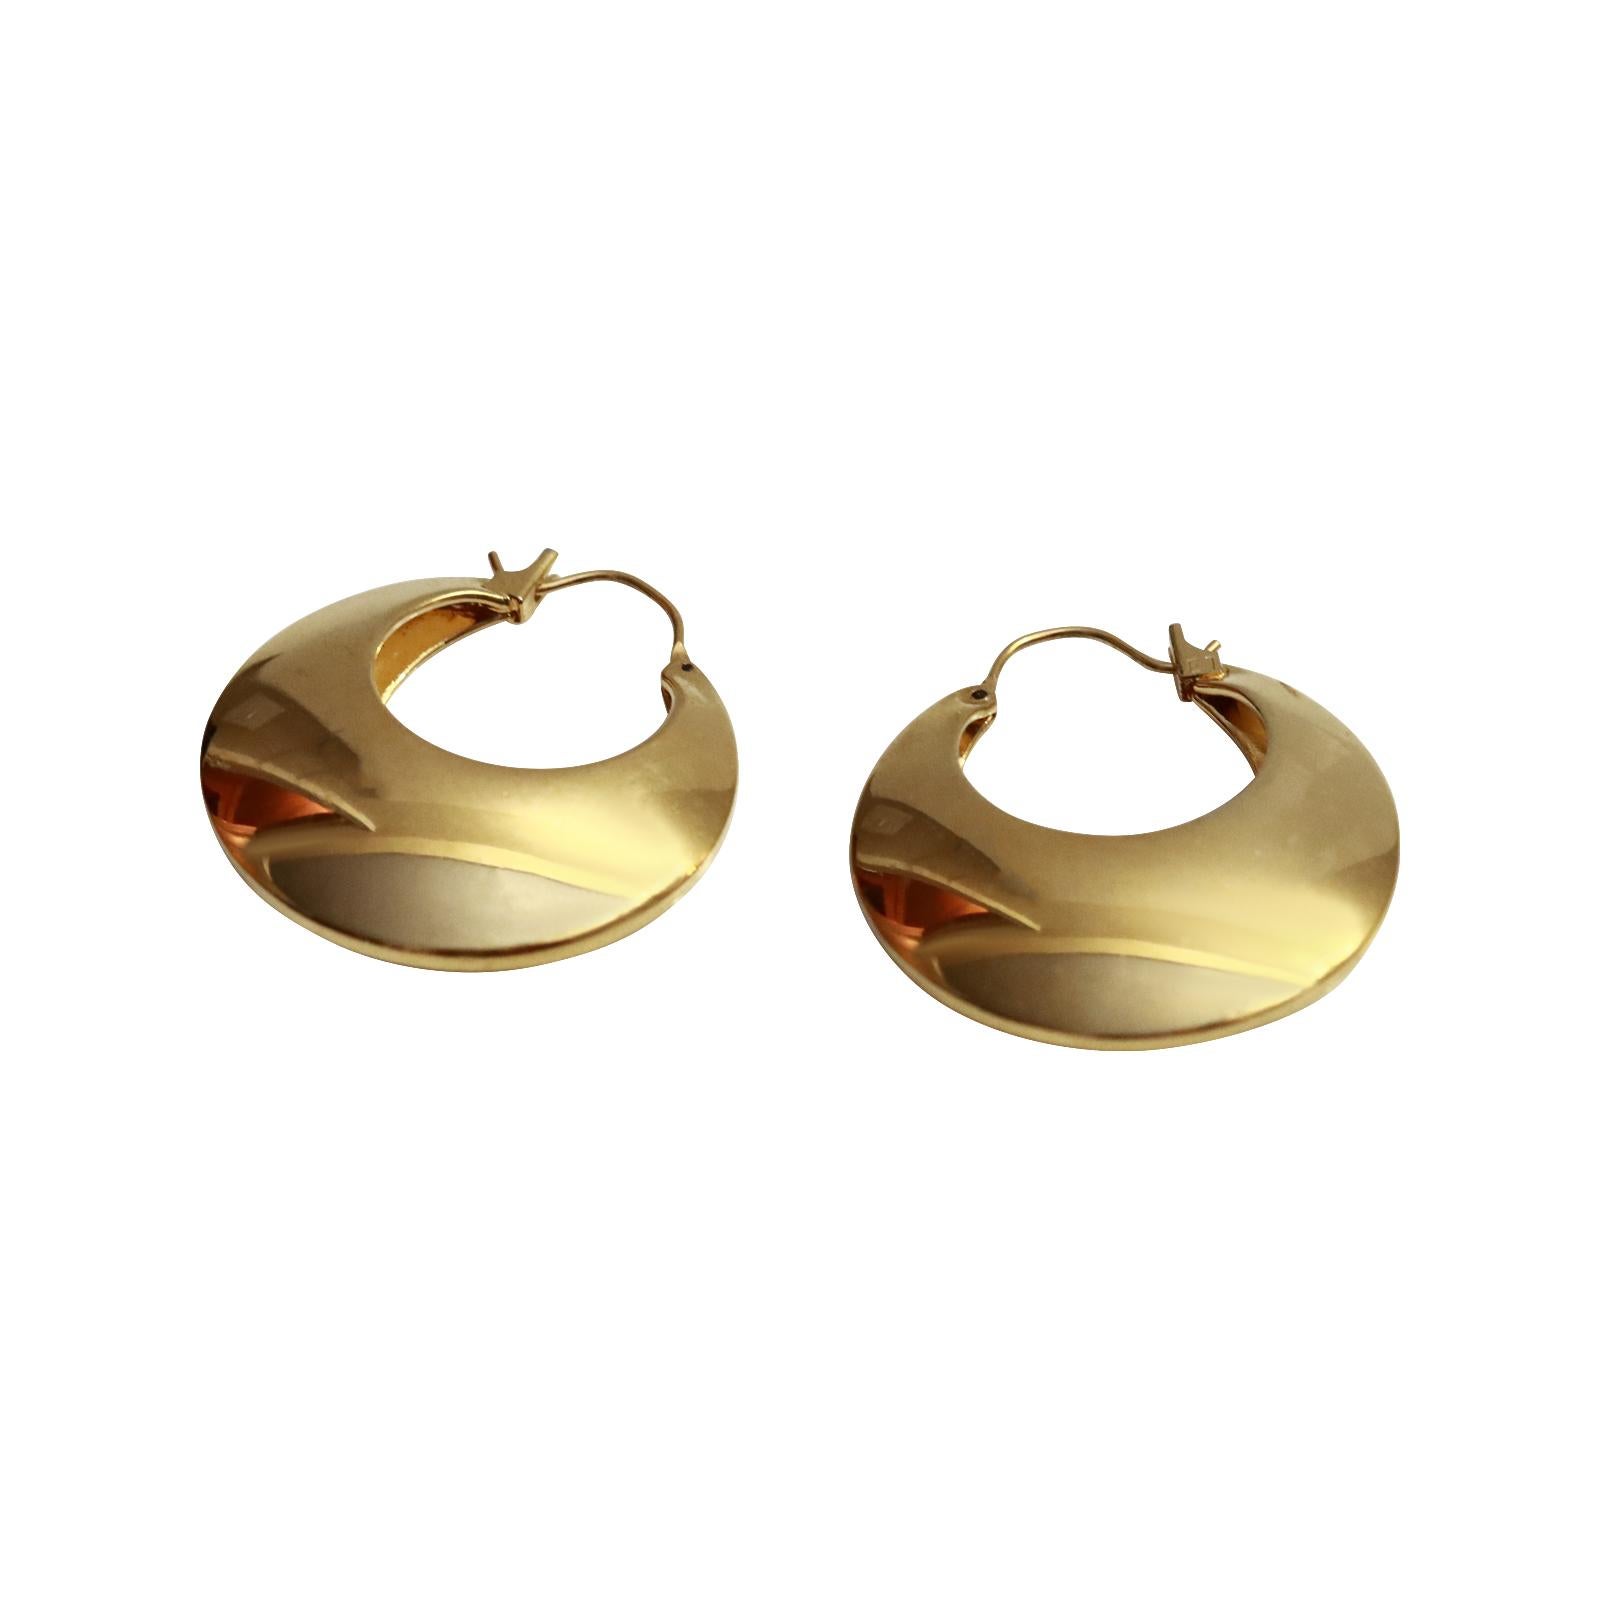 Vintage Gold Tone Hoop Earrings Circa 1980s. These are the earrings that you didn't know you needed until you try them on.  They are not giant in size but giant in punch.  Very chic. They are so special.  Well made.  They are hollow on the inside